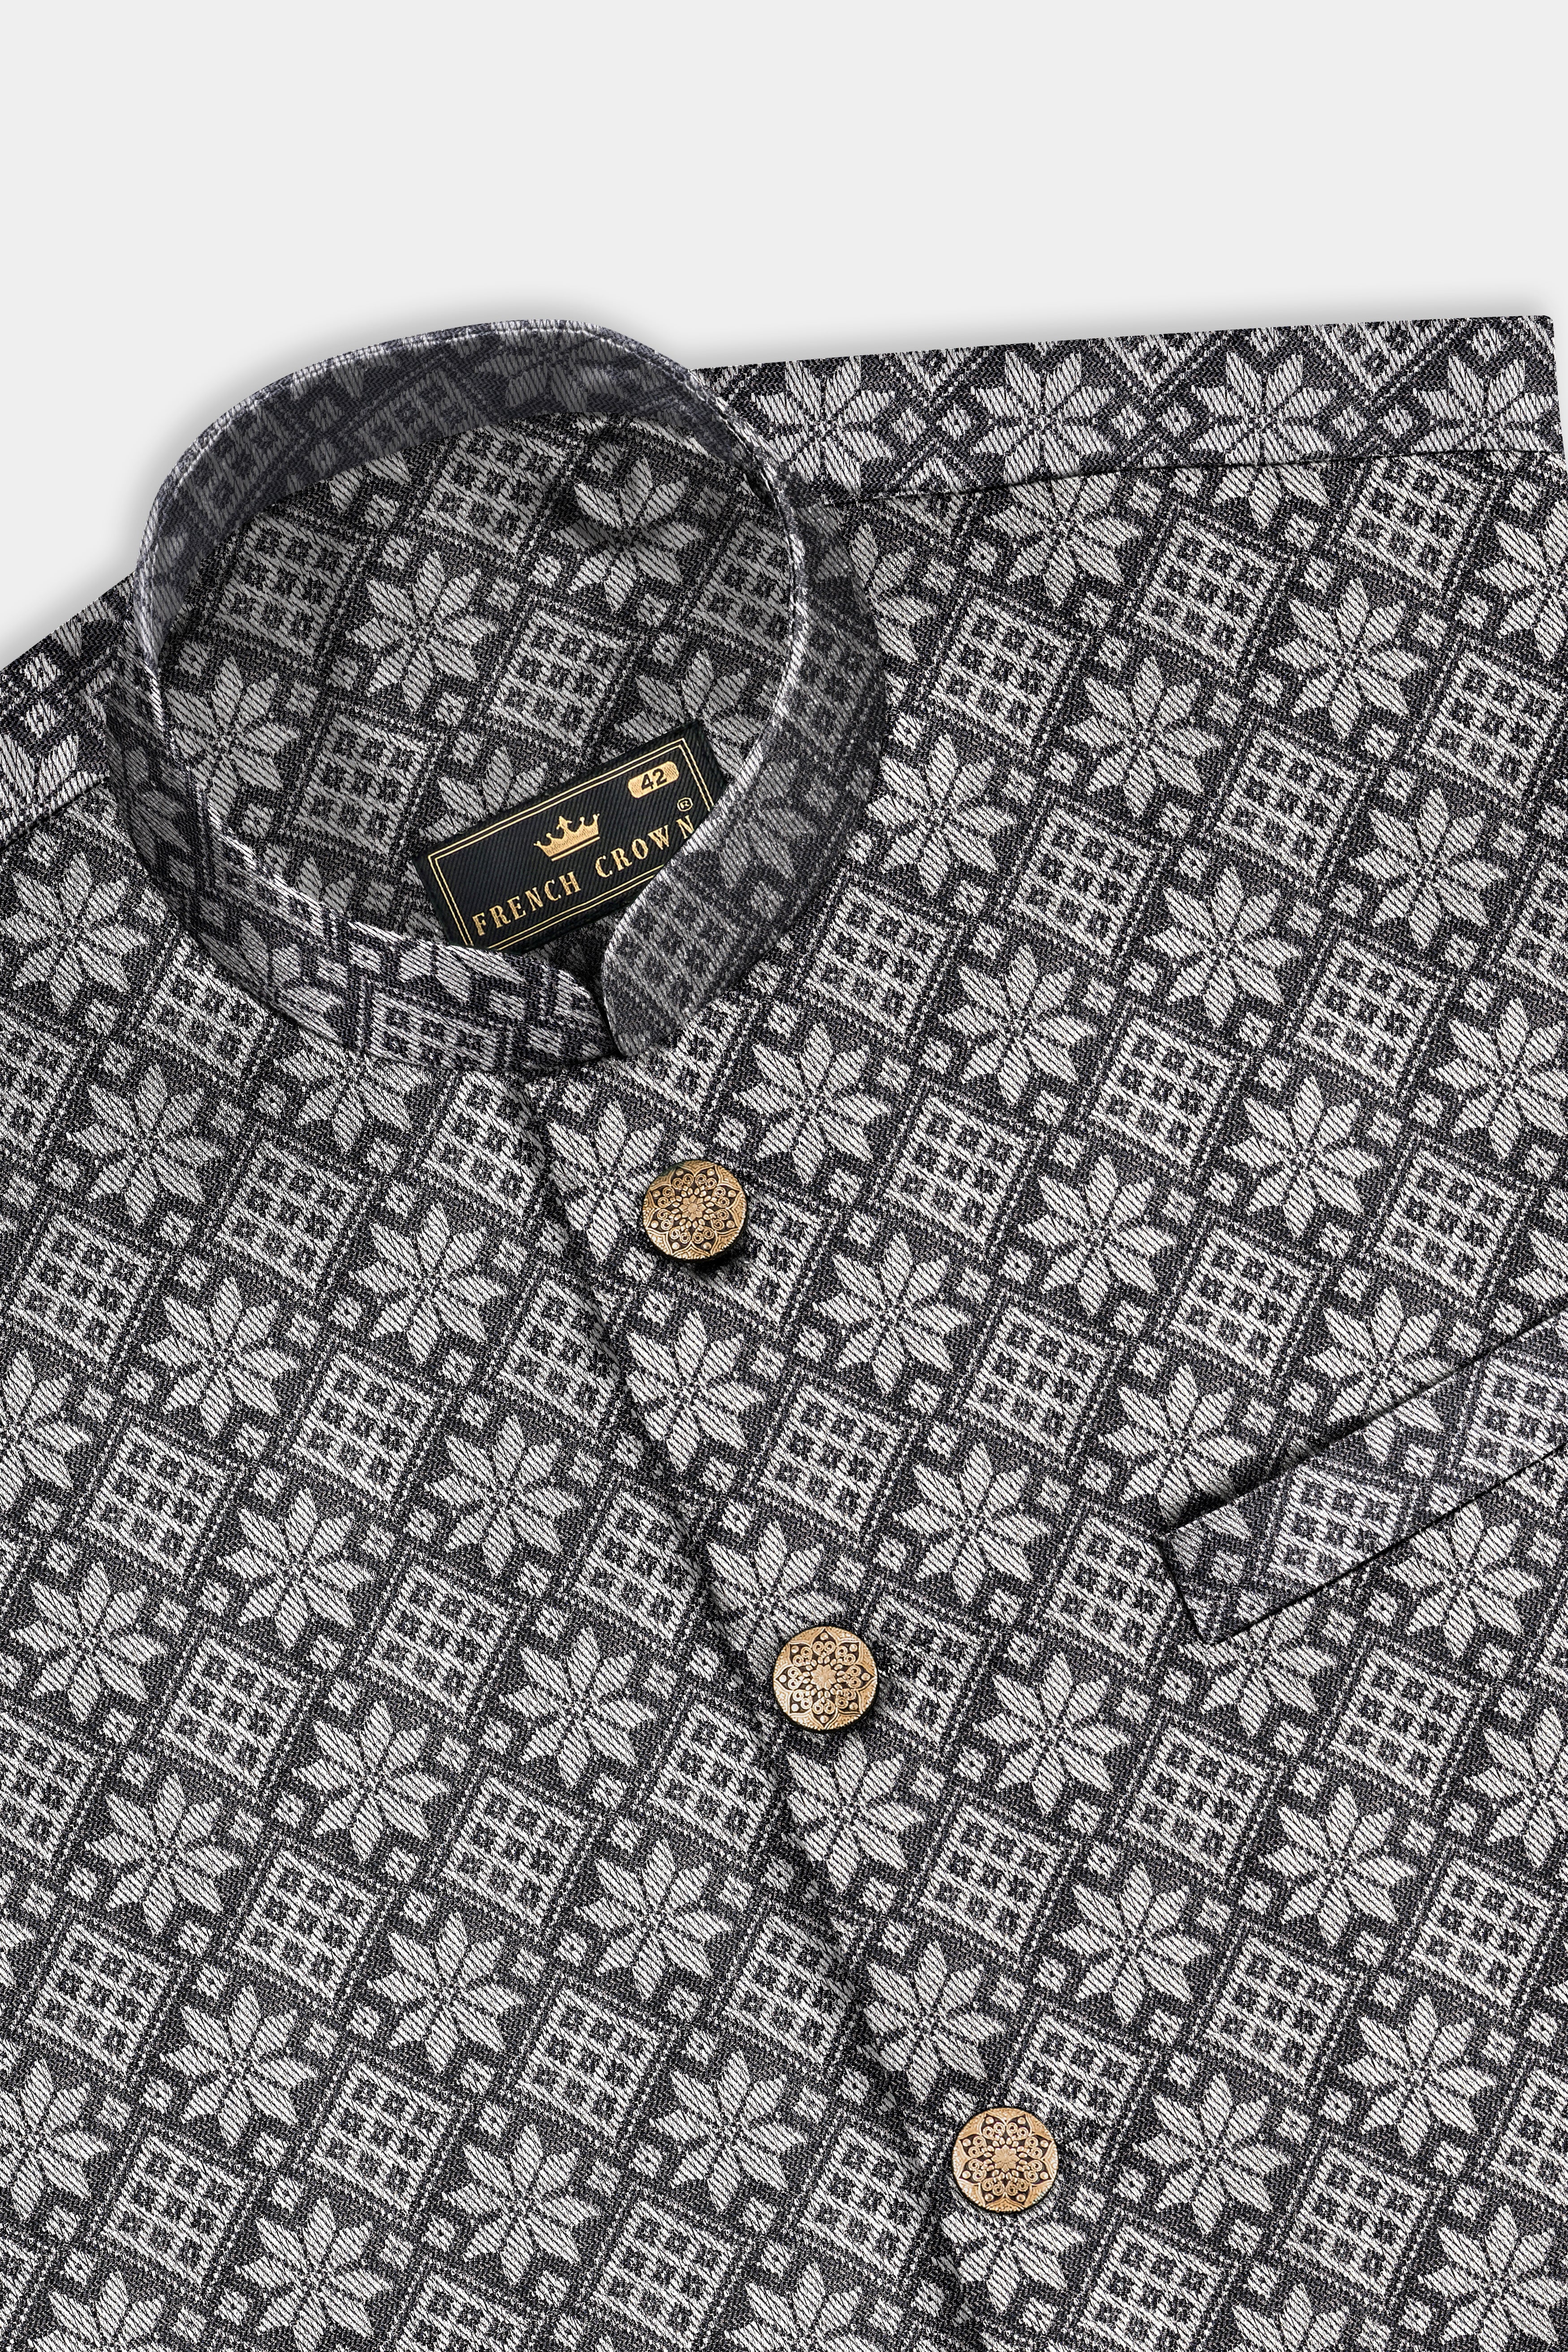 Ironside gray and Cement gray Floral Printed Nehru Jacket